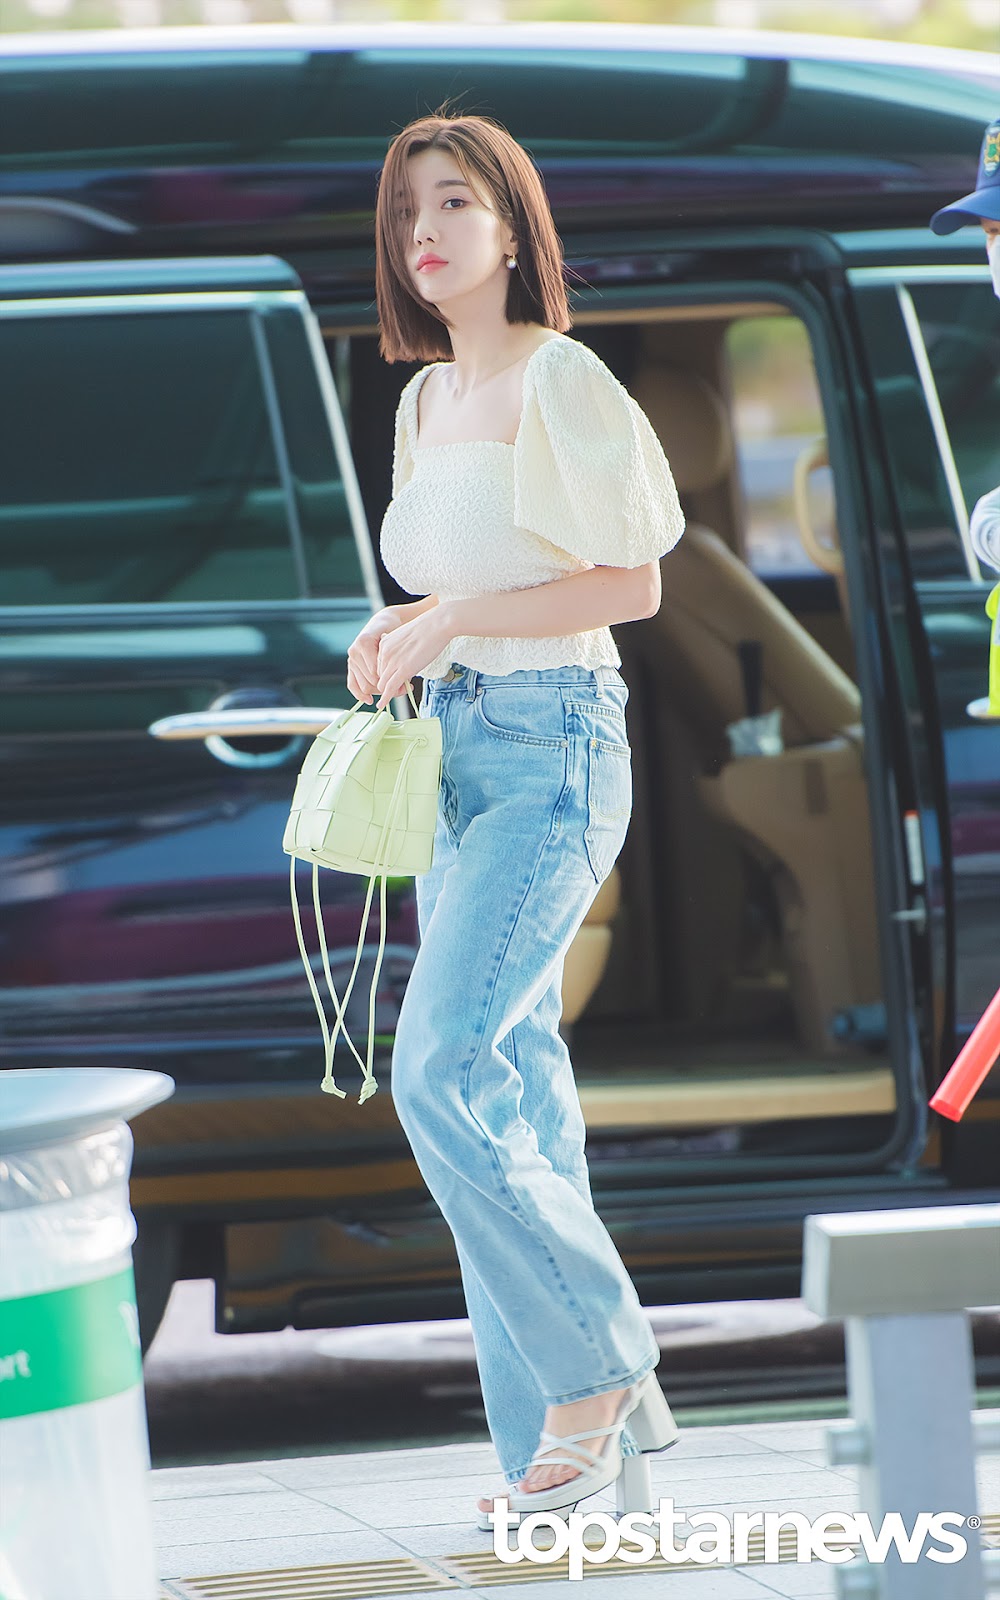 Kwon Eunbi's aggressive volume and beauty is emphasized. Airport fashion legend